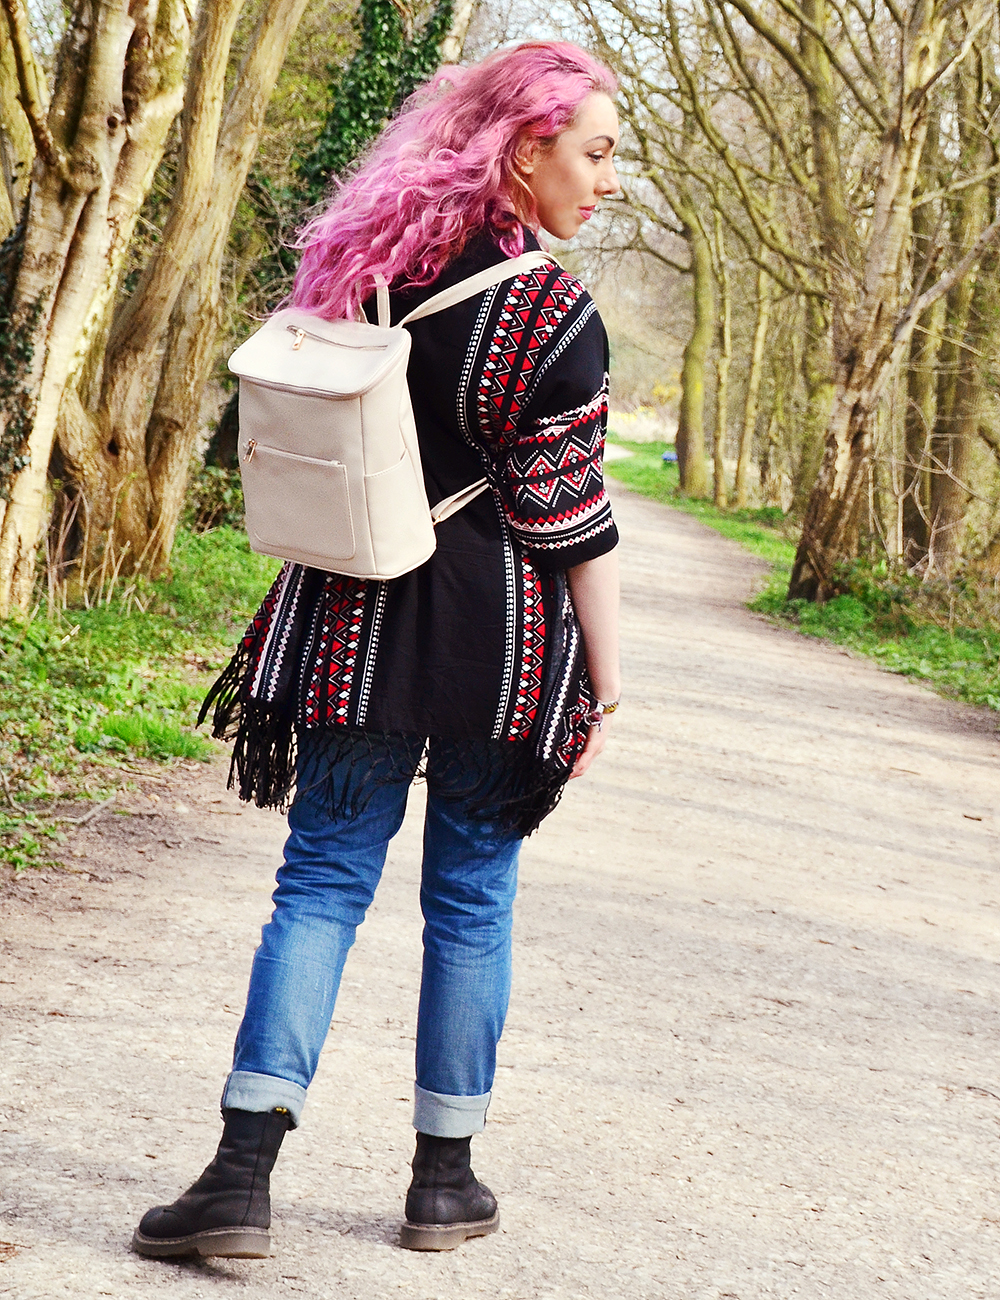 Stephi LaReine pink hair liverpool lifestyle blogger, OUTFIT OF THE DAY Kimono // Primark Black Tee * // Englorious Blue Boyfriend Ripped Jeans * // Long Tall Sally Dr Martens * // Shoetique Ivory Packpack // Primark Black Strap Watch * // Daniel Wellington 